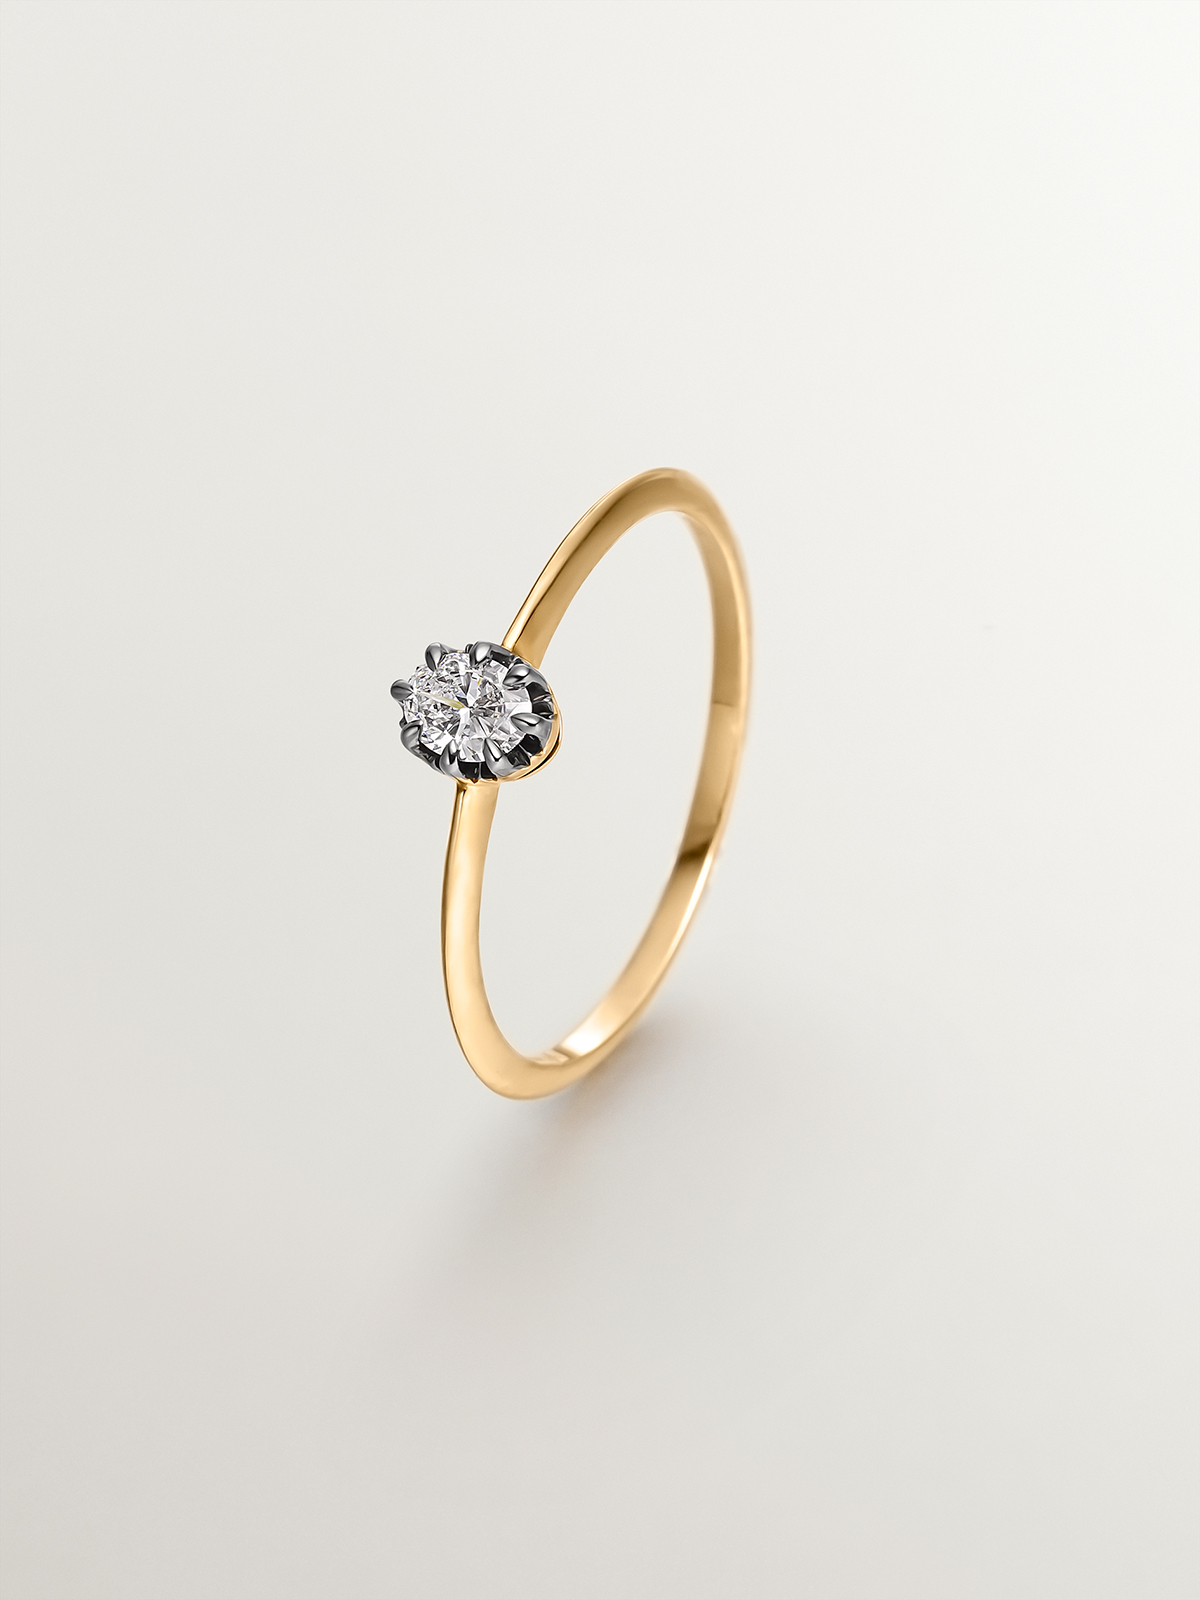 18K yellow gold ring with aged effect and oval-cut diamond